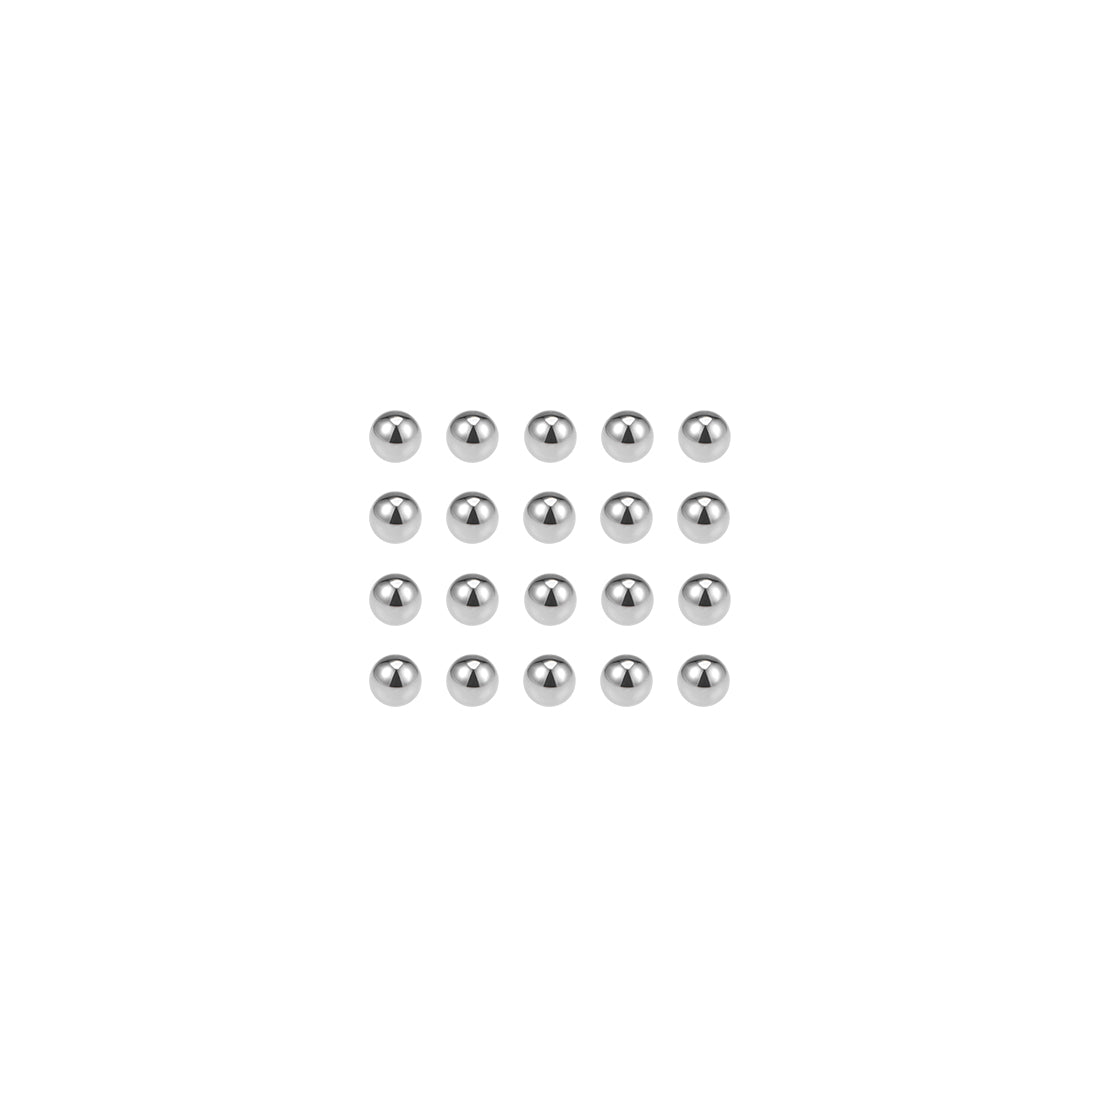 uxcell Uxcell Precision Balls 1.5mm Solid Chrome Steel G10 for Ball Bearing Wheel 100pcs